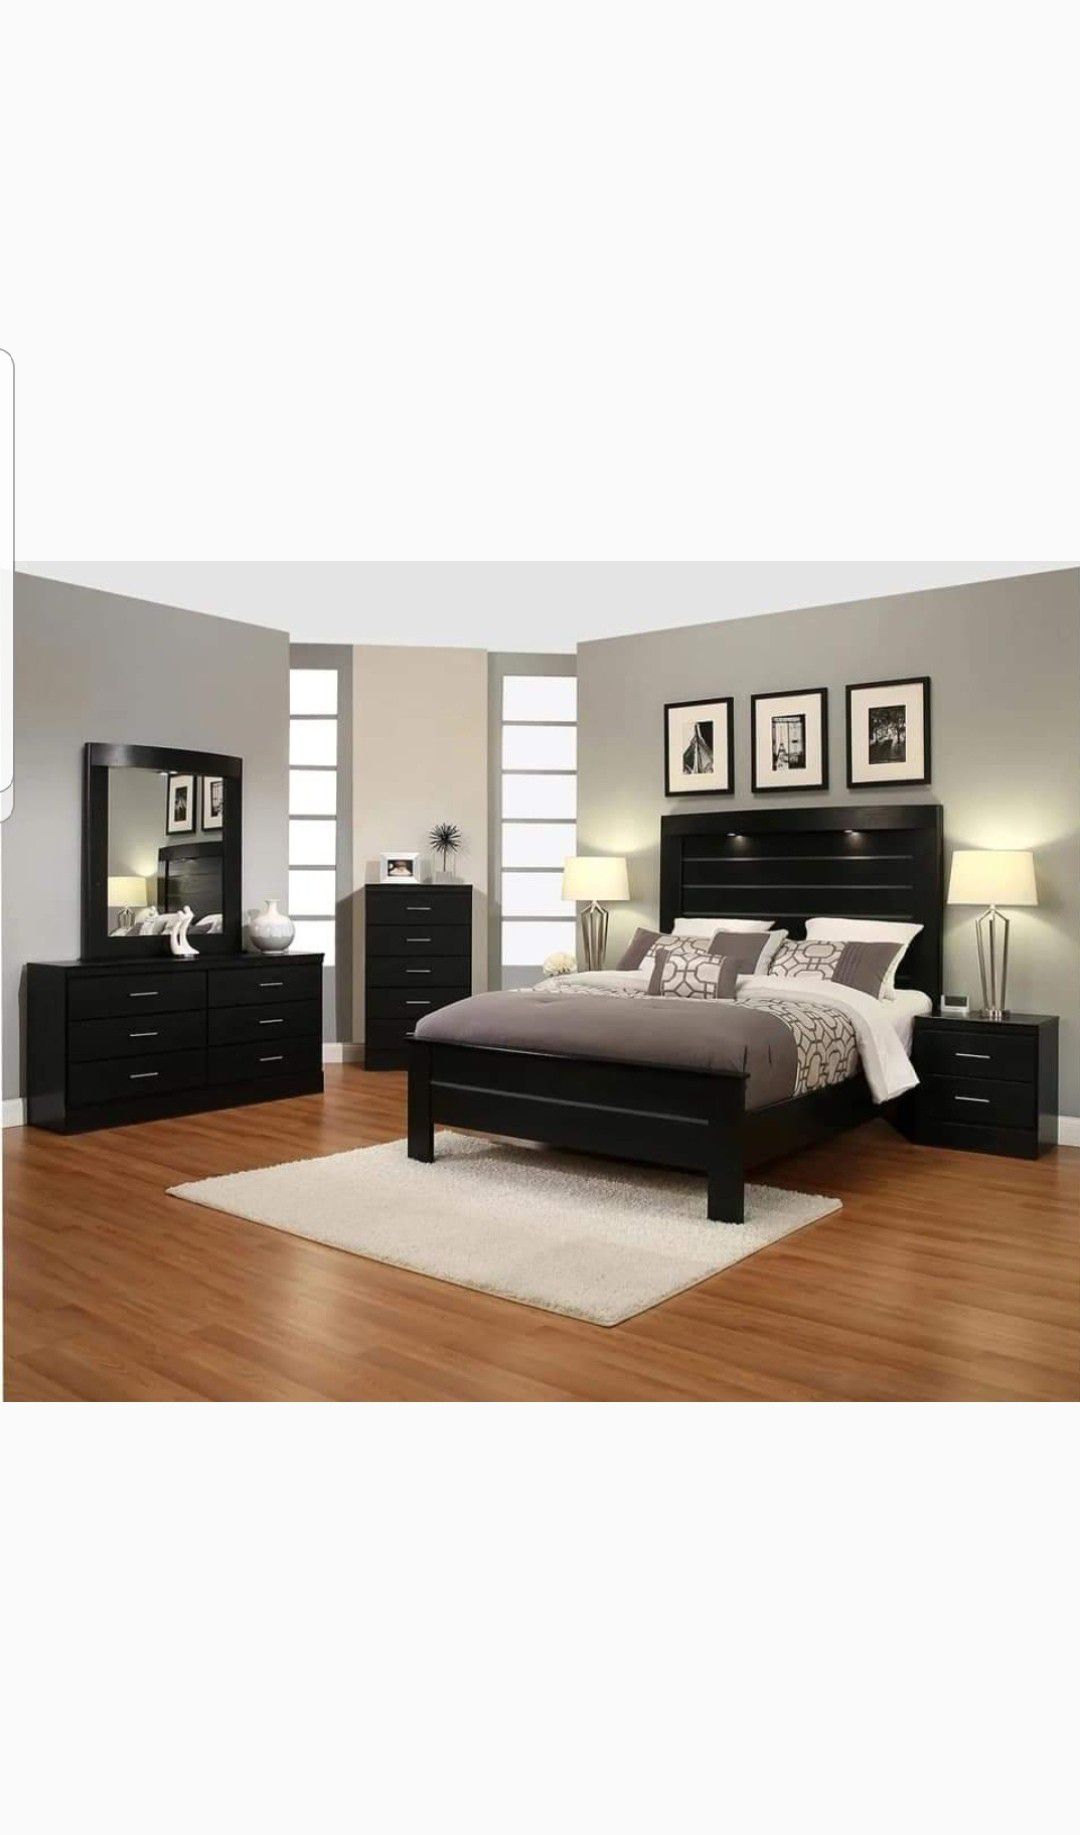 BRAND NEW 4 PC QUEEN SIZE BEDROOM SET BED DRESSER MIRROR NIGHTSTAND NEW FURNITURE ADD MATTRESS AVAILABLE USA MEXICO FURNITURE